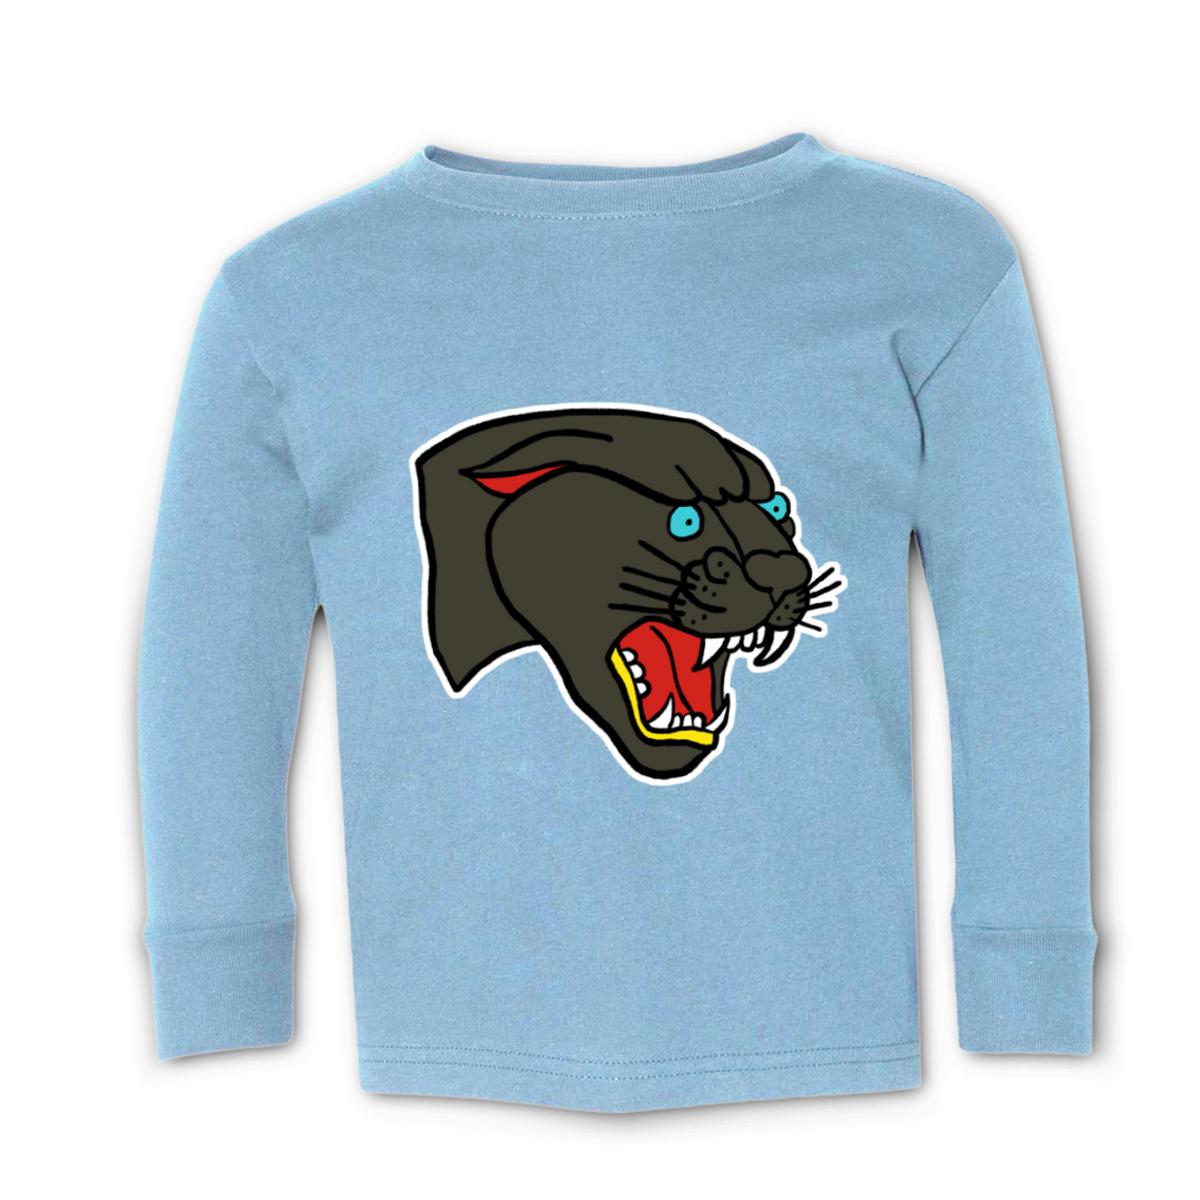 American Traditional Panther Kid's Long Sleeve Tee Small light-blue